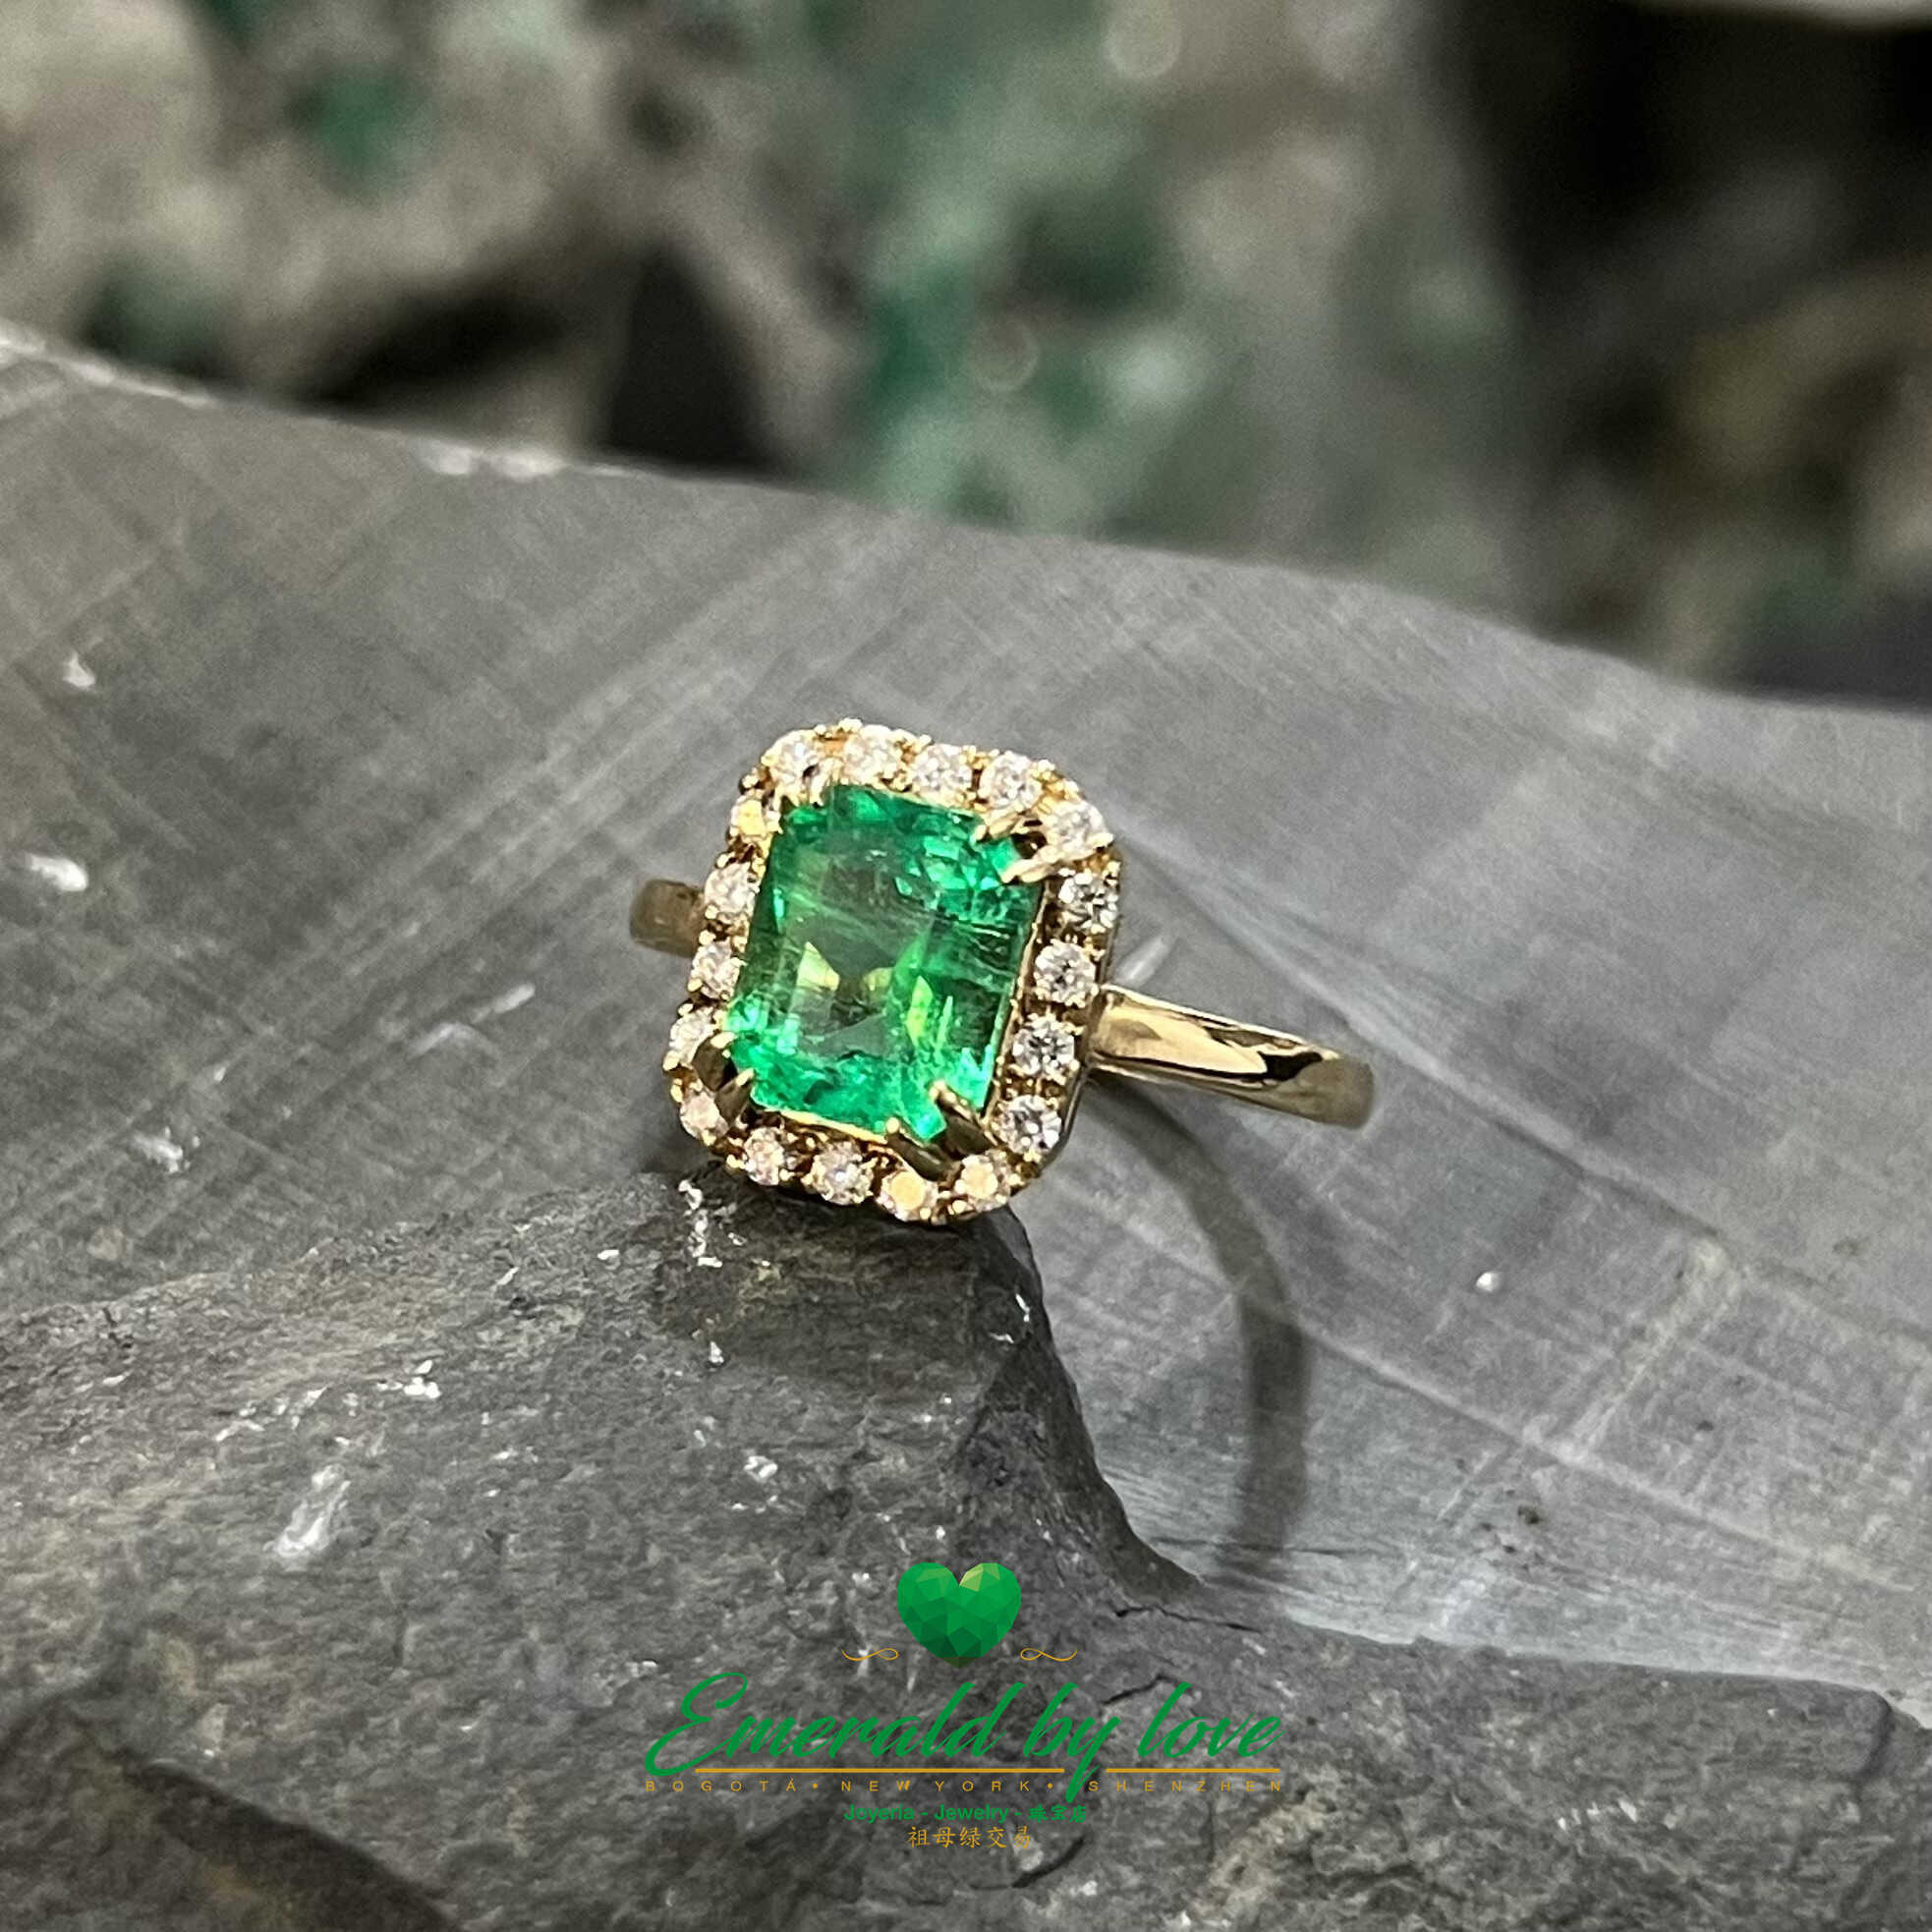 Emerald Engagement Ring: 2.1 CT Center Stone Surrounded by Diamonds